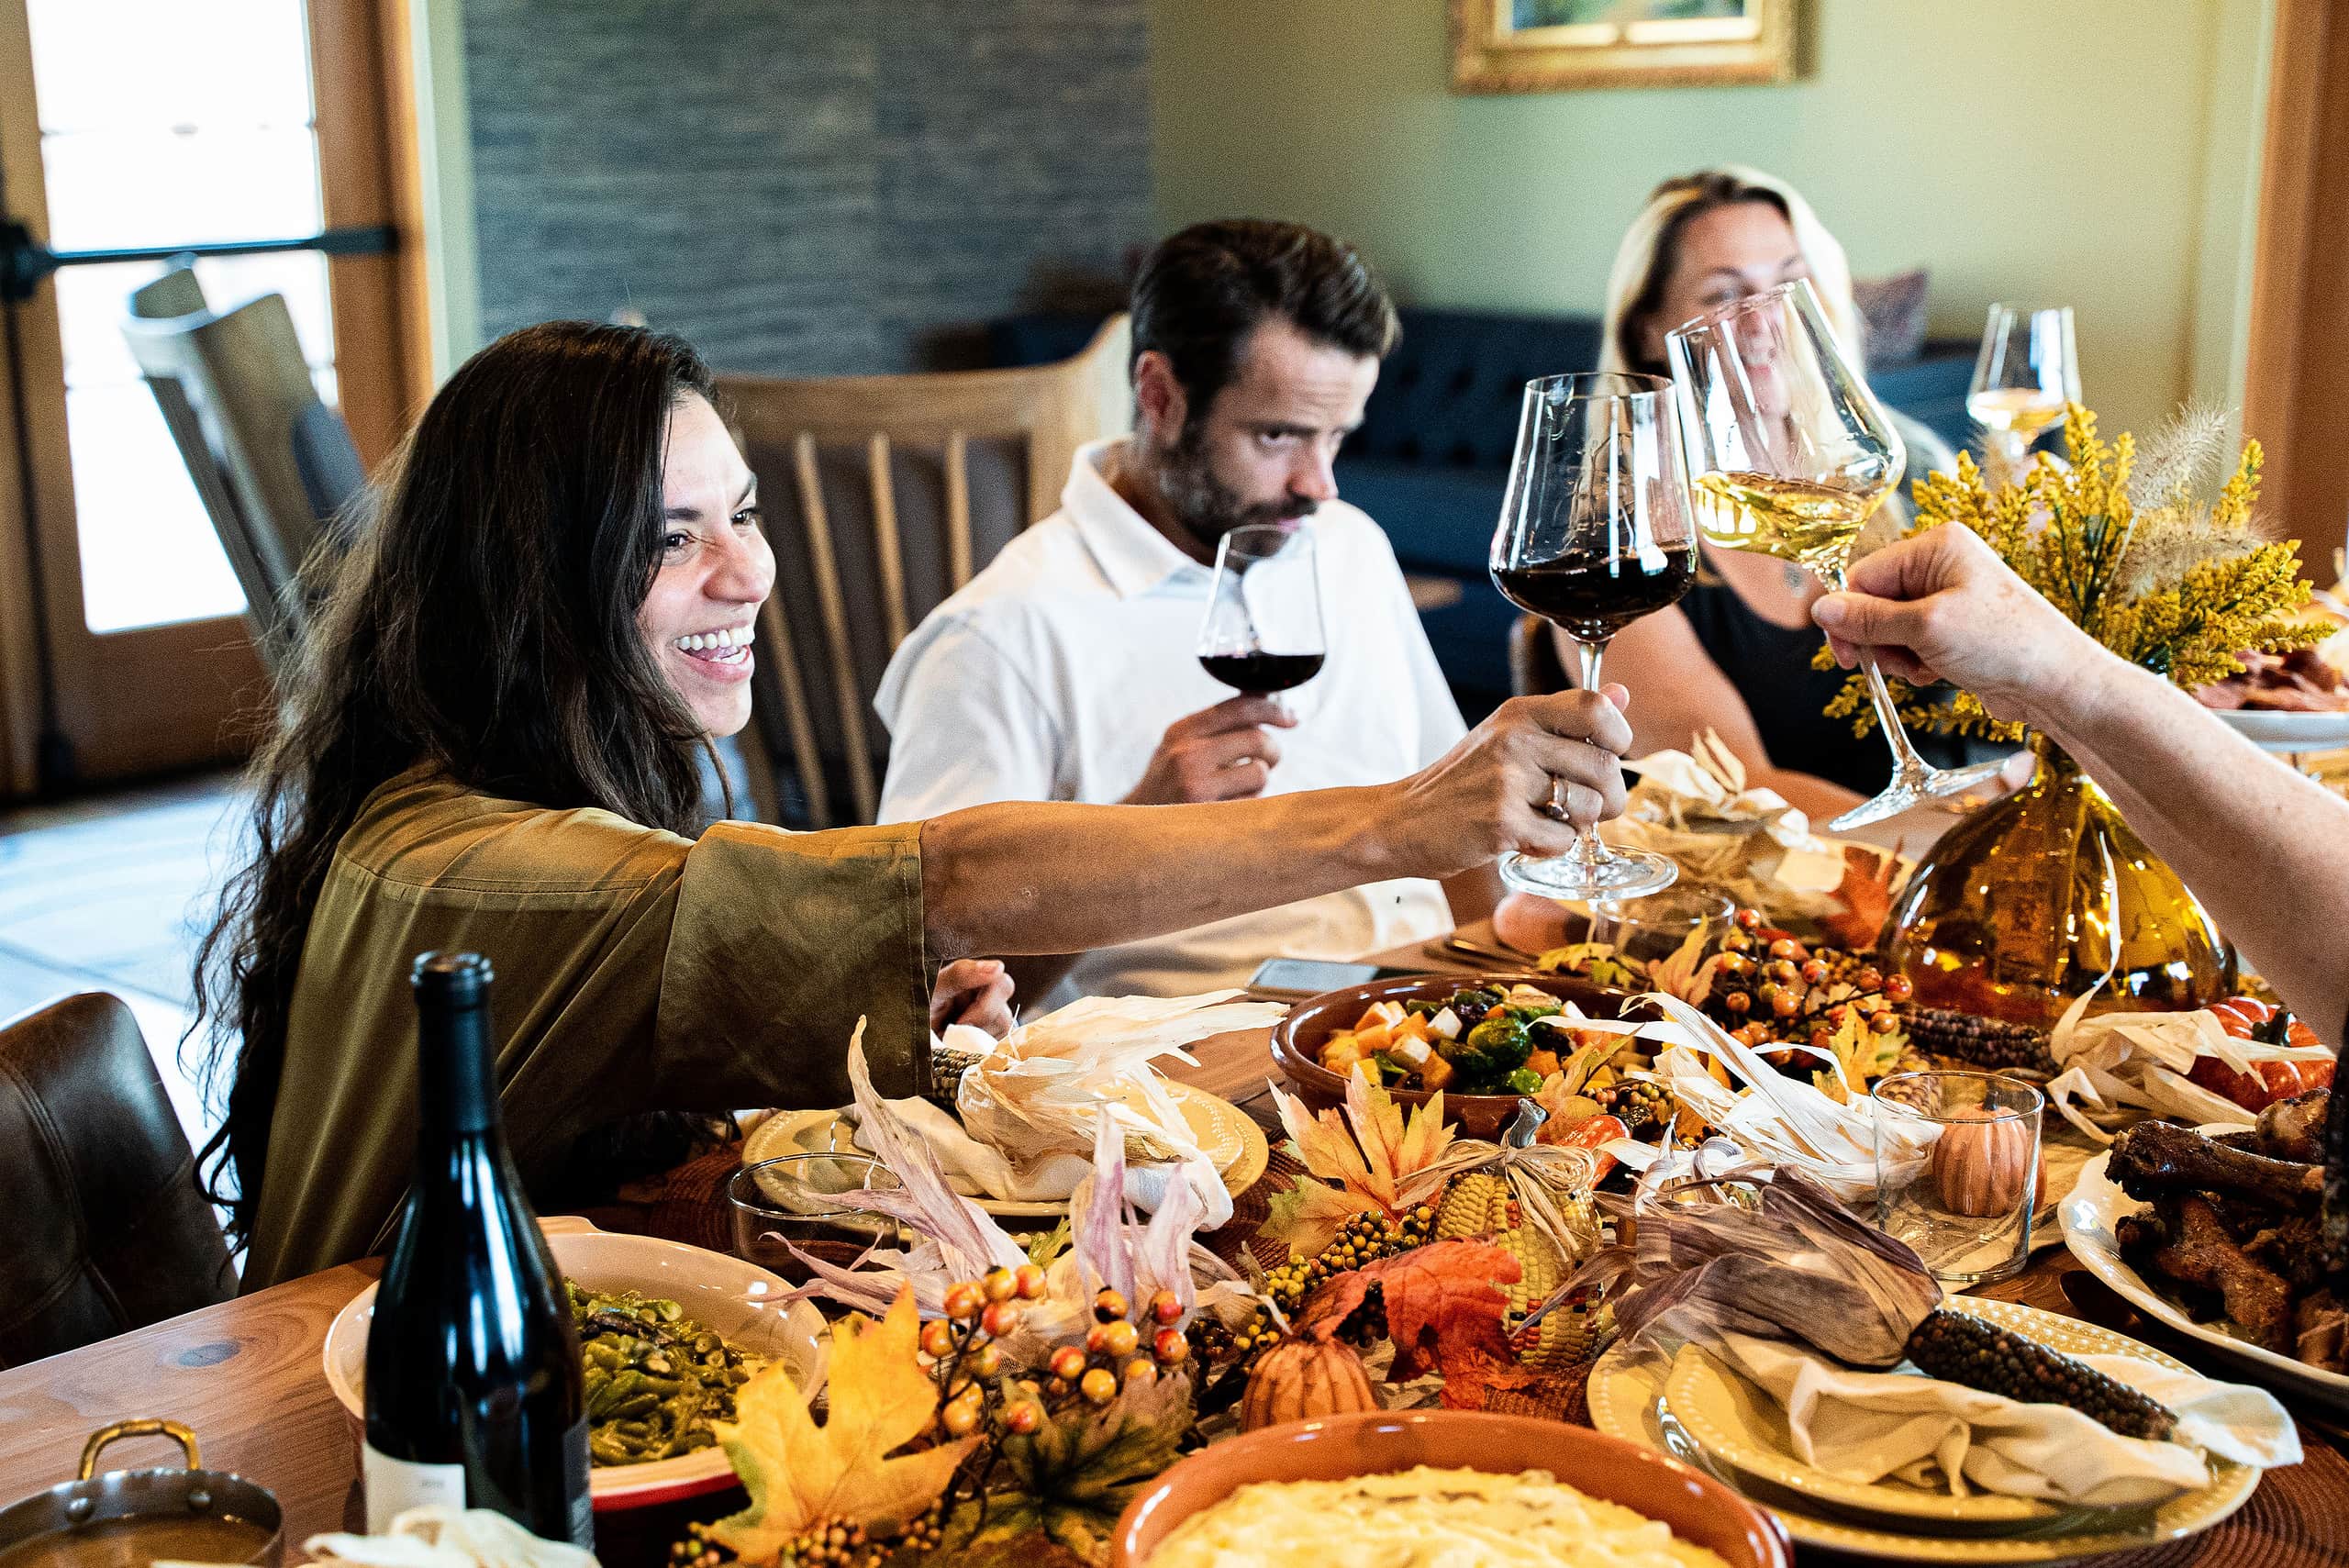 People clink glasses together over a Thanksgiving dinner table.